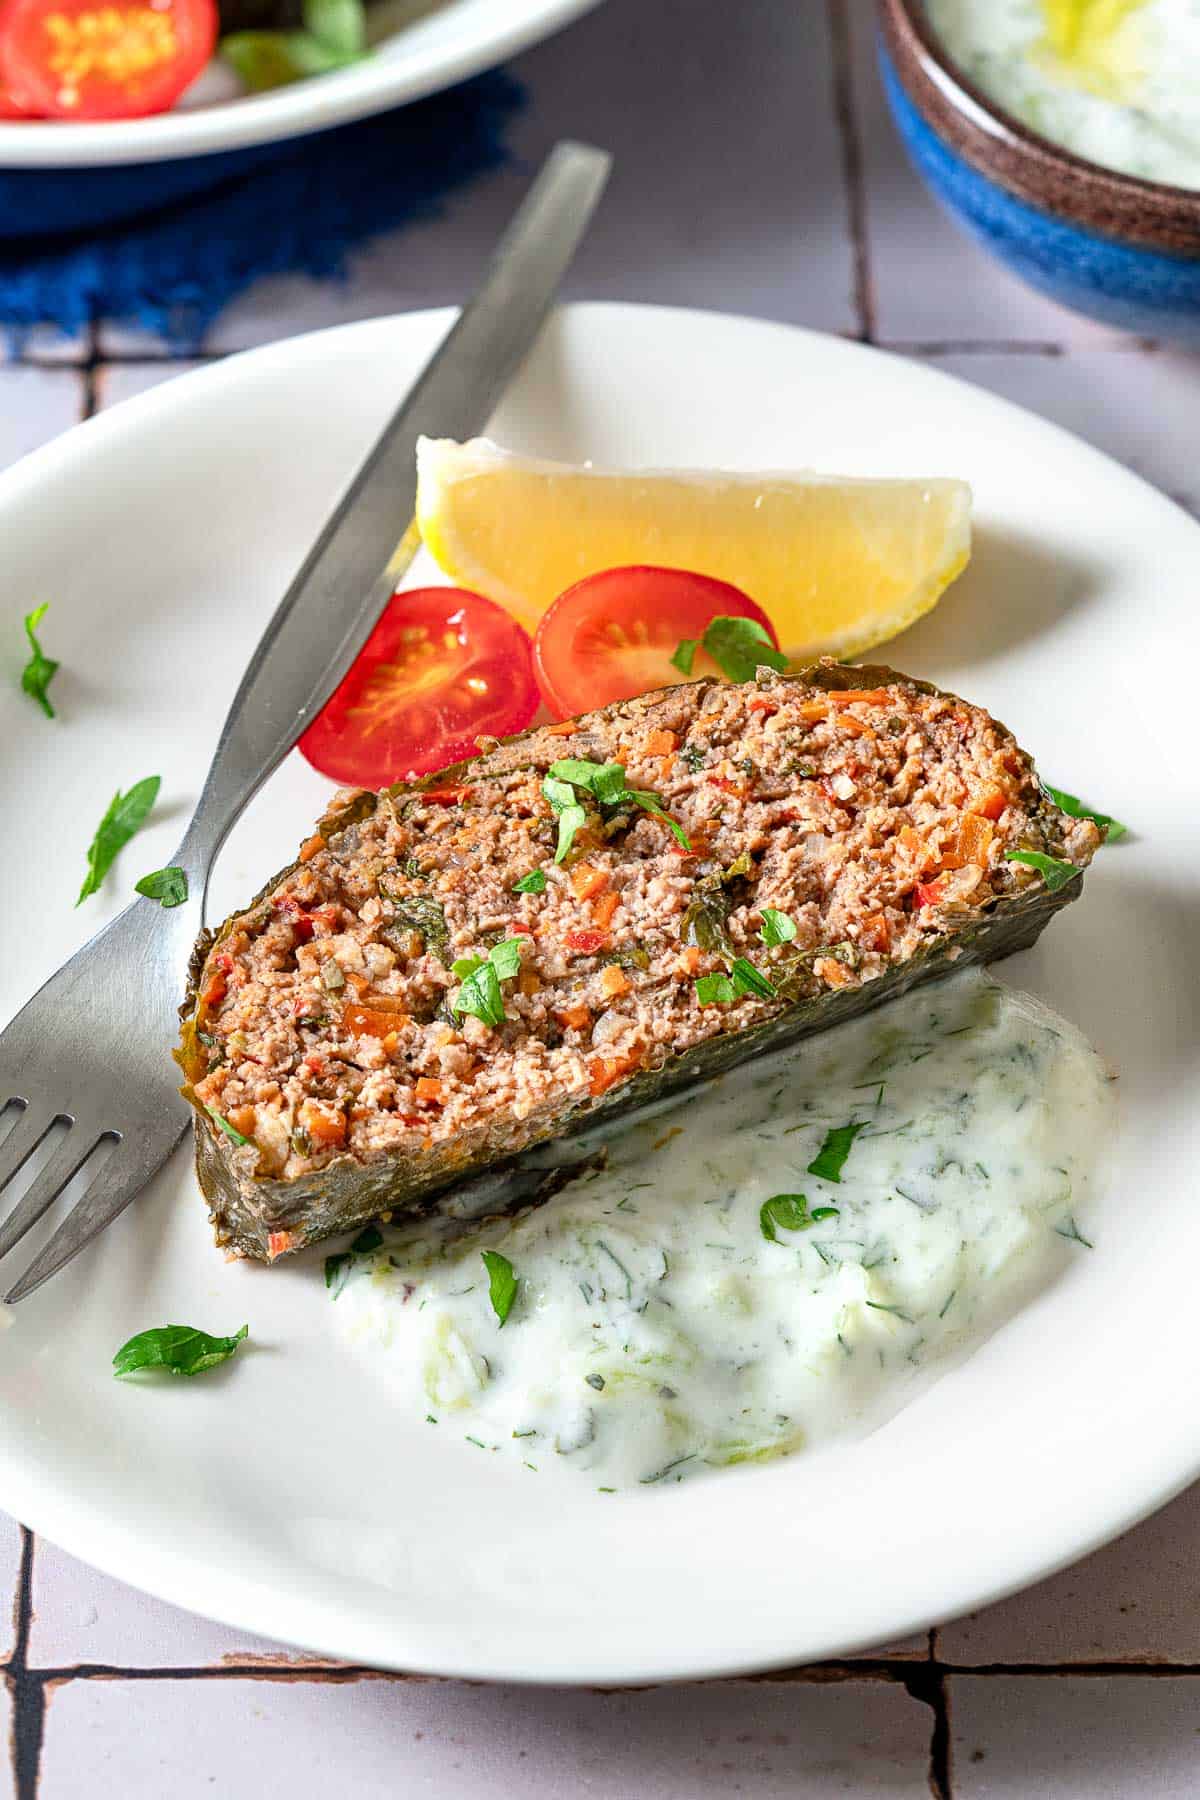 A close up of a slice of the healthy greek meatloaf on a plate with a lemon wedge, grape tomato halves, tzatziki sauce and a fork.